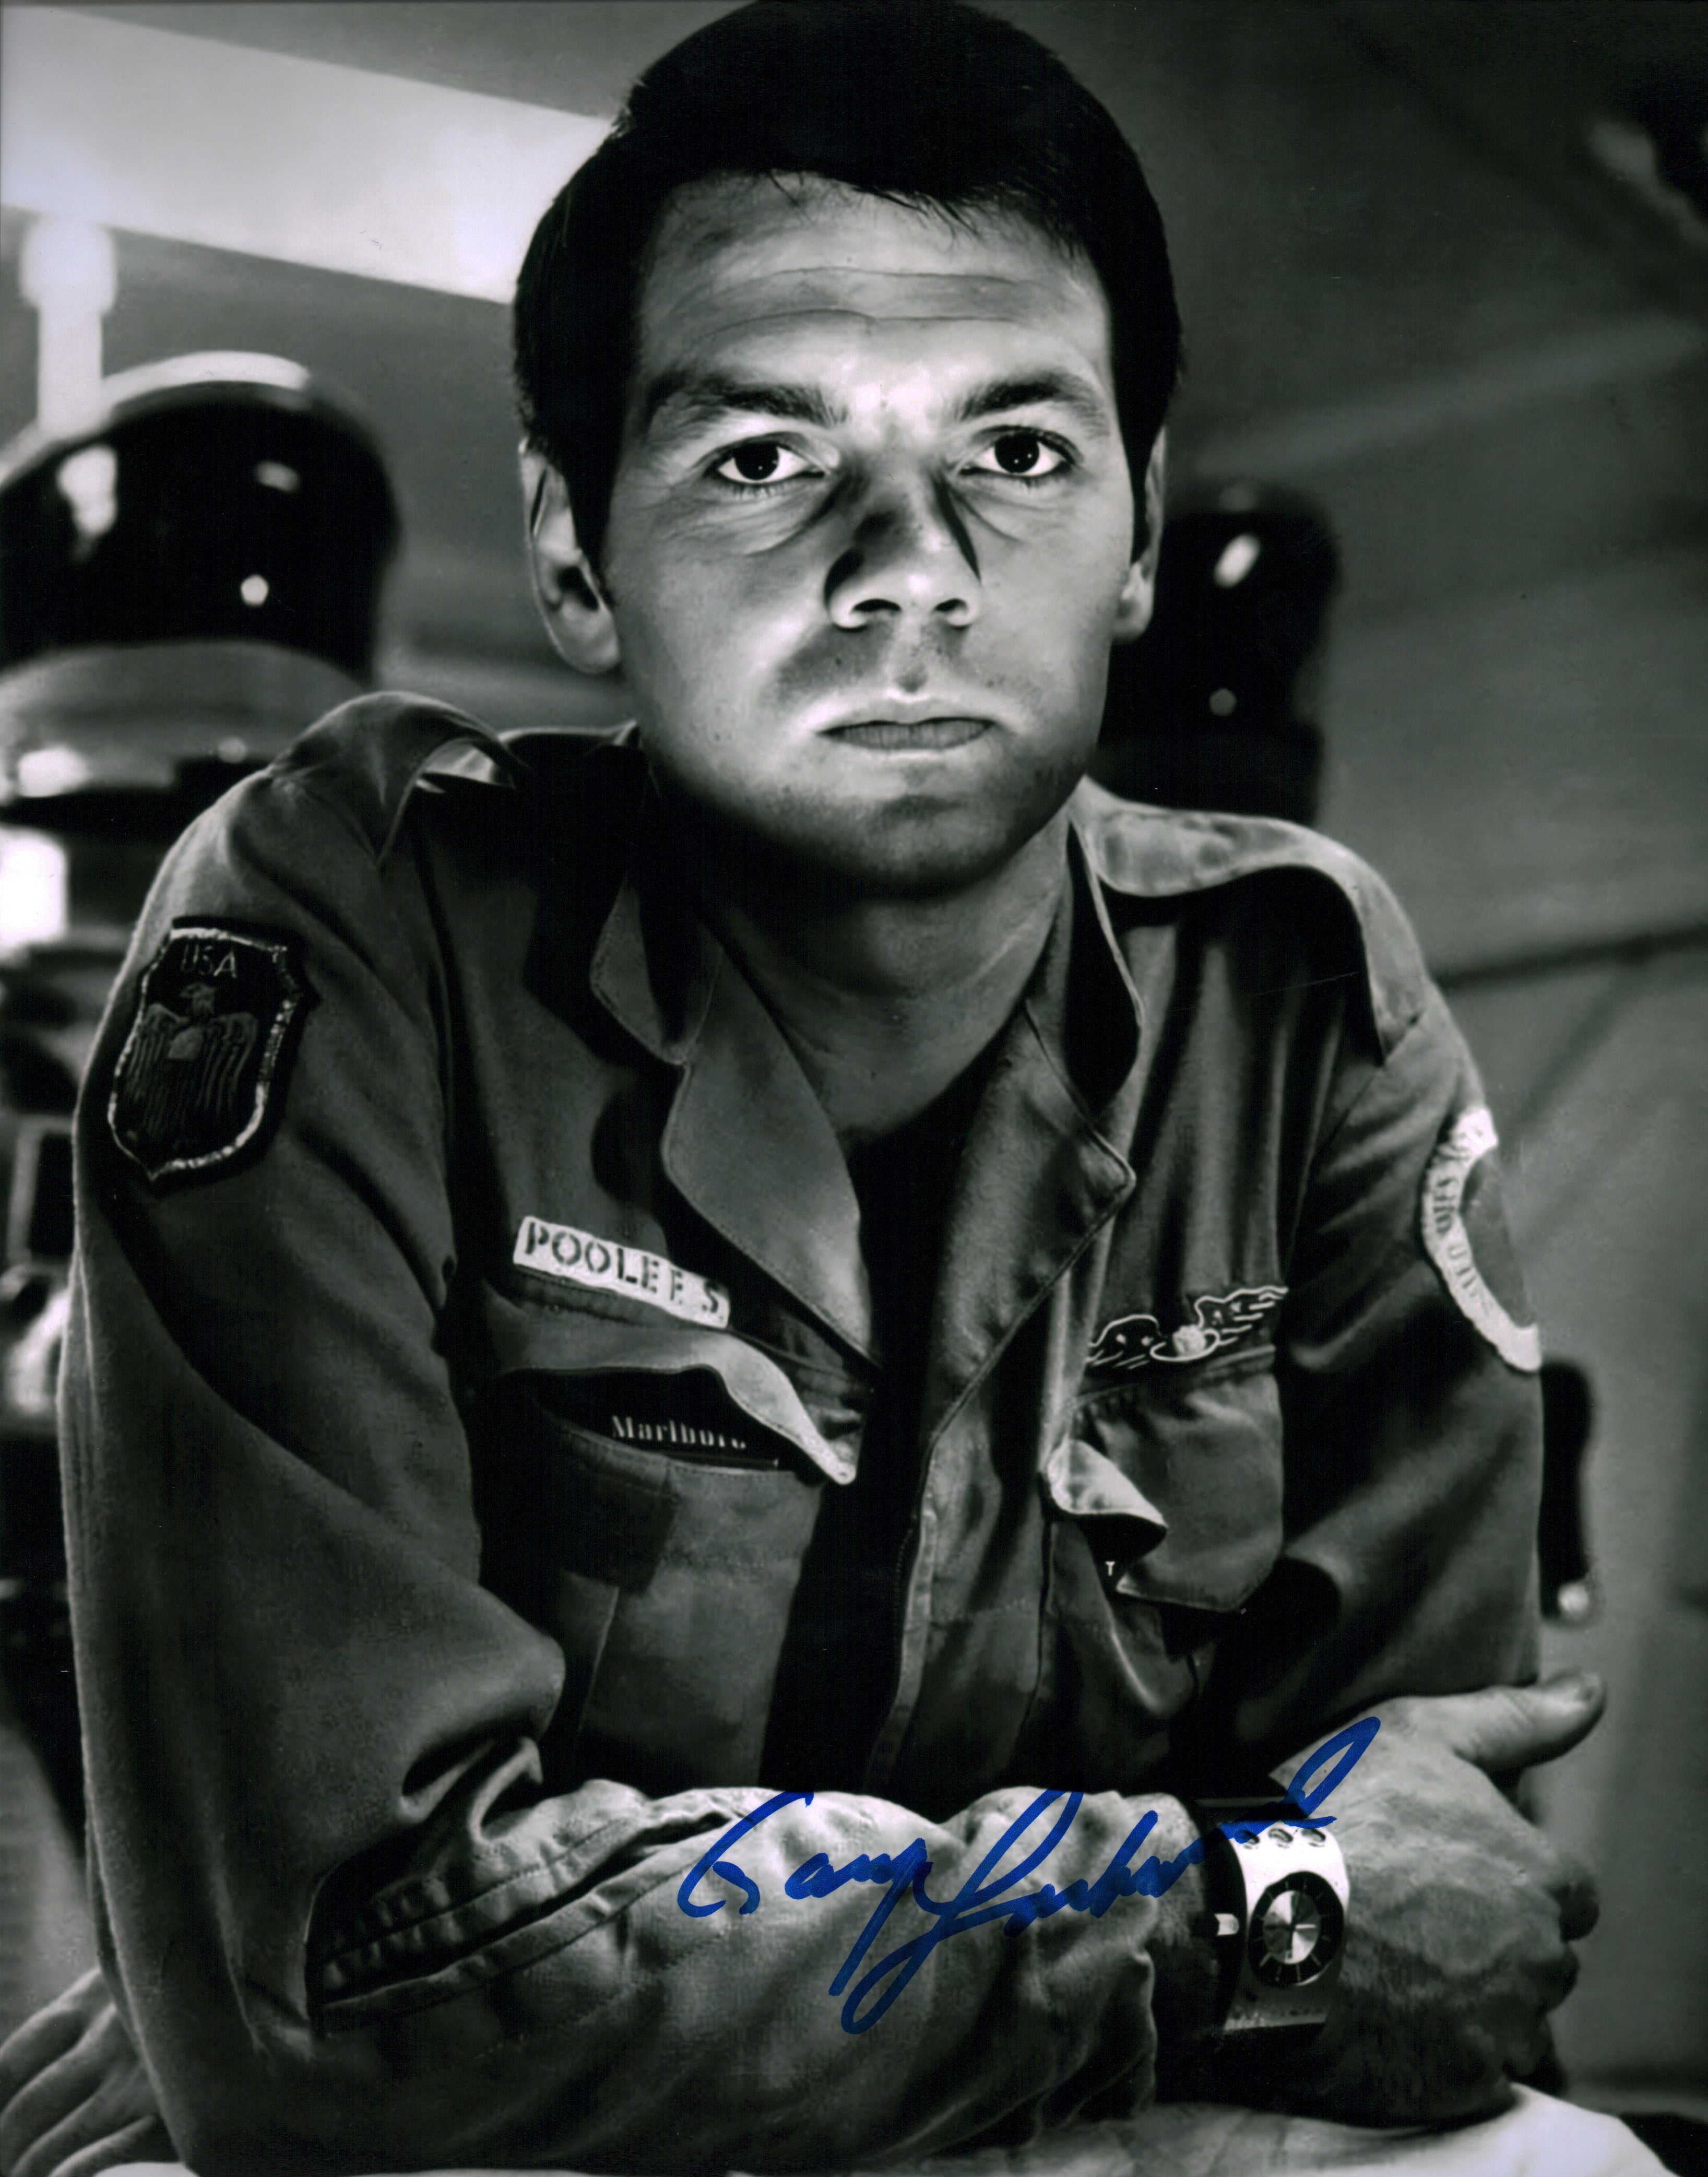 Gary Lockwood 2001: A Space Odyssey 11x14 Mini Posters Signed JSA Certified Autograph